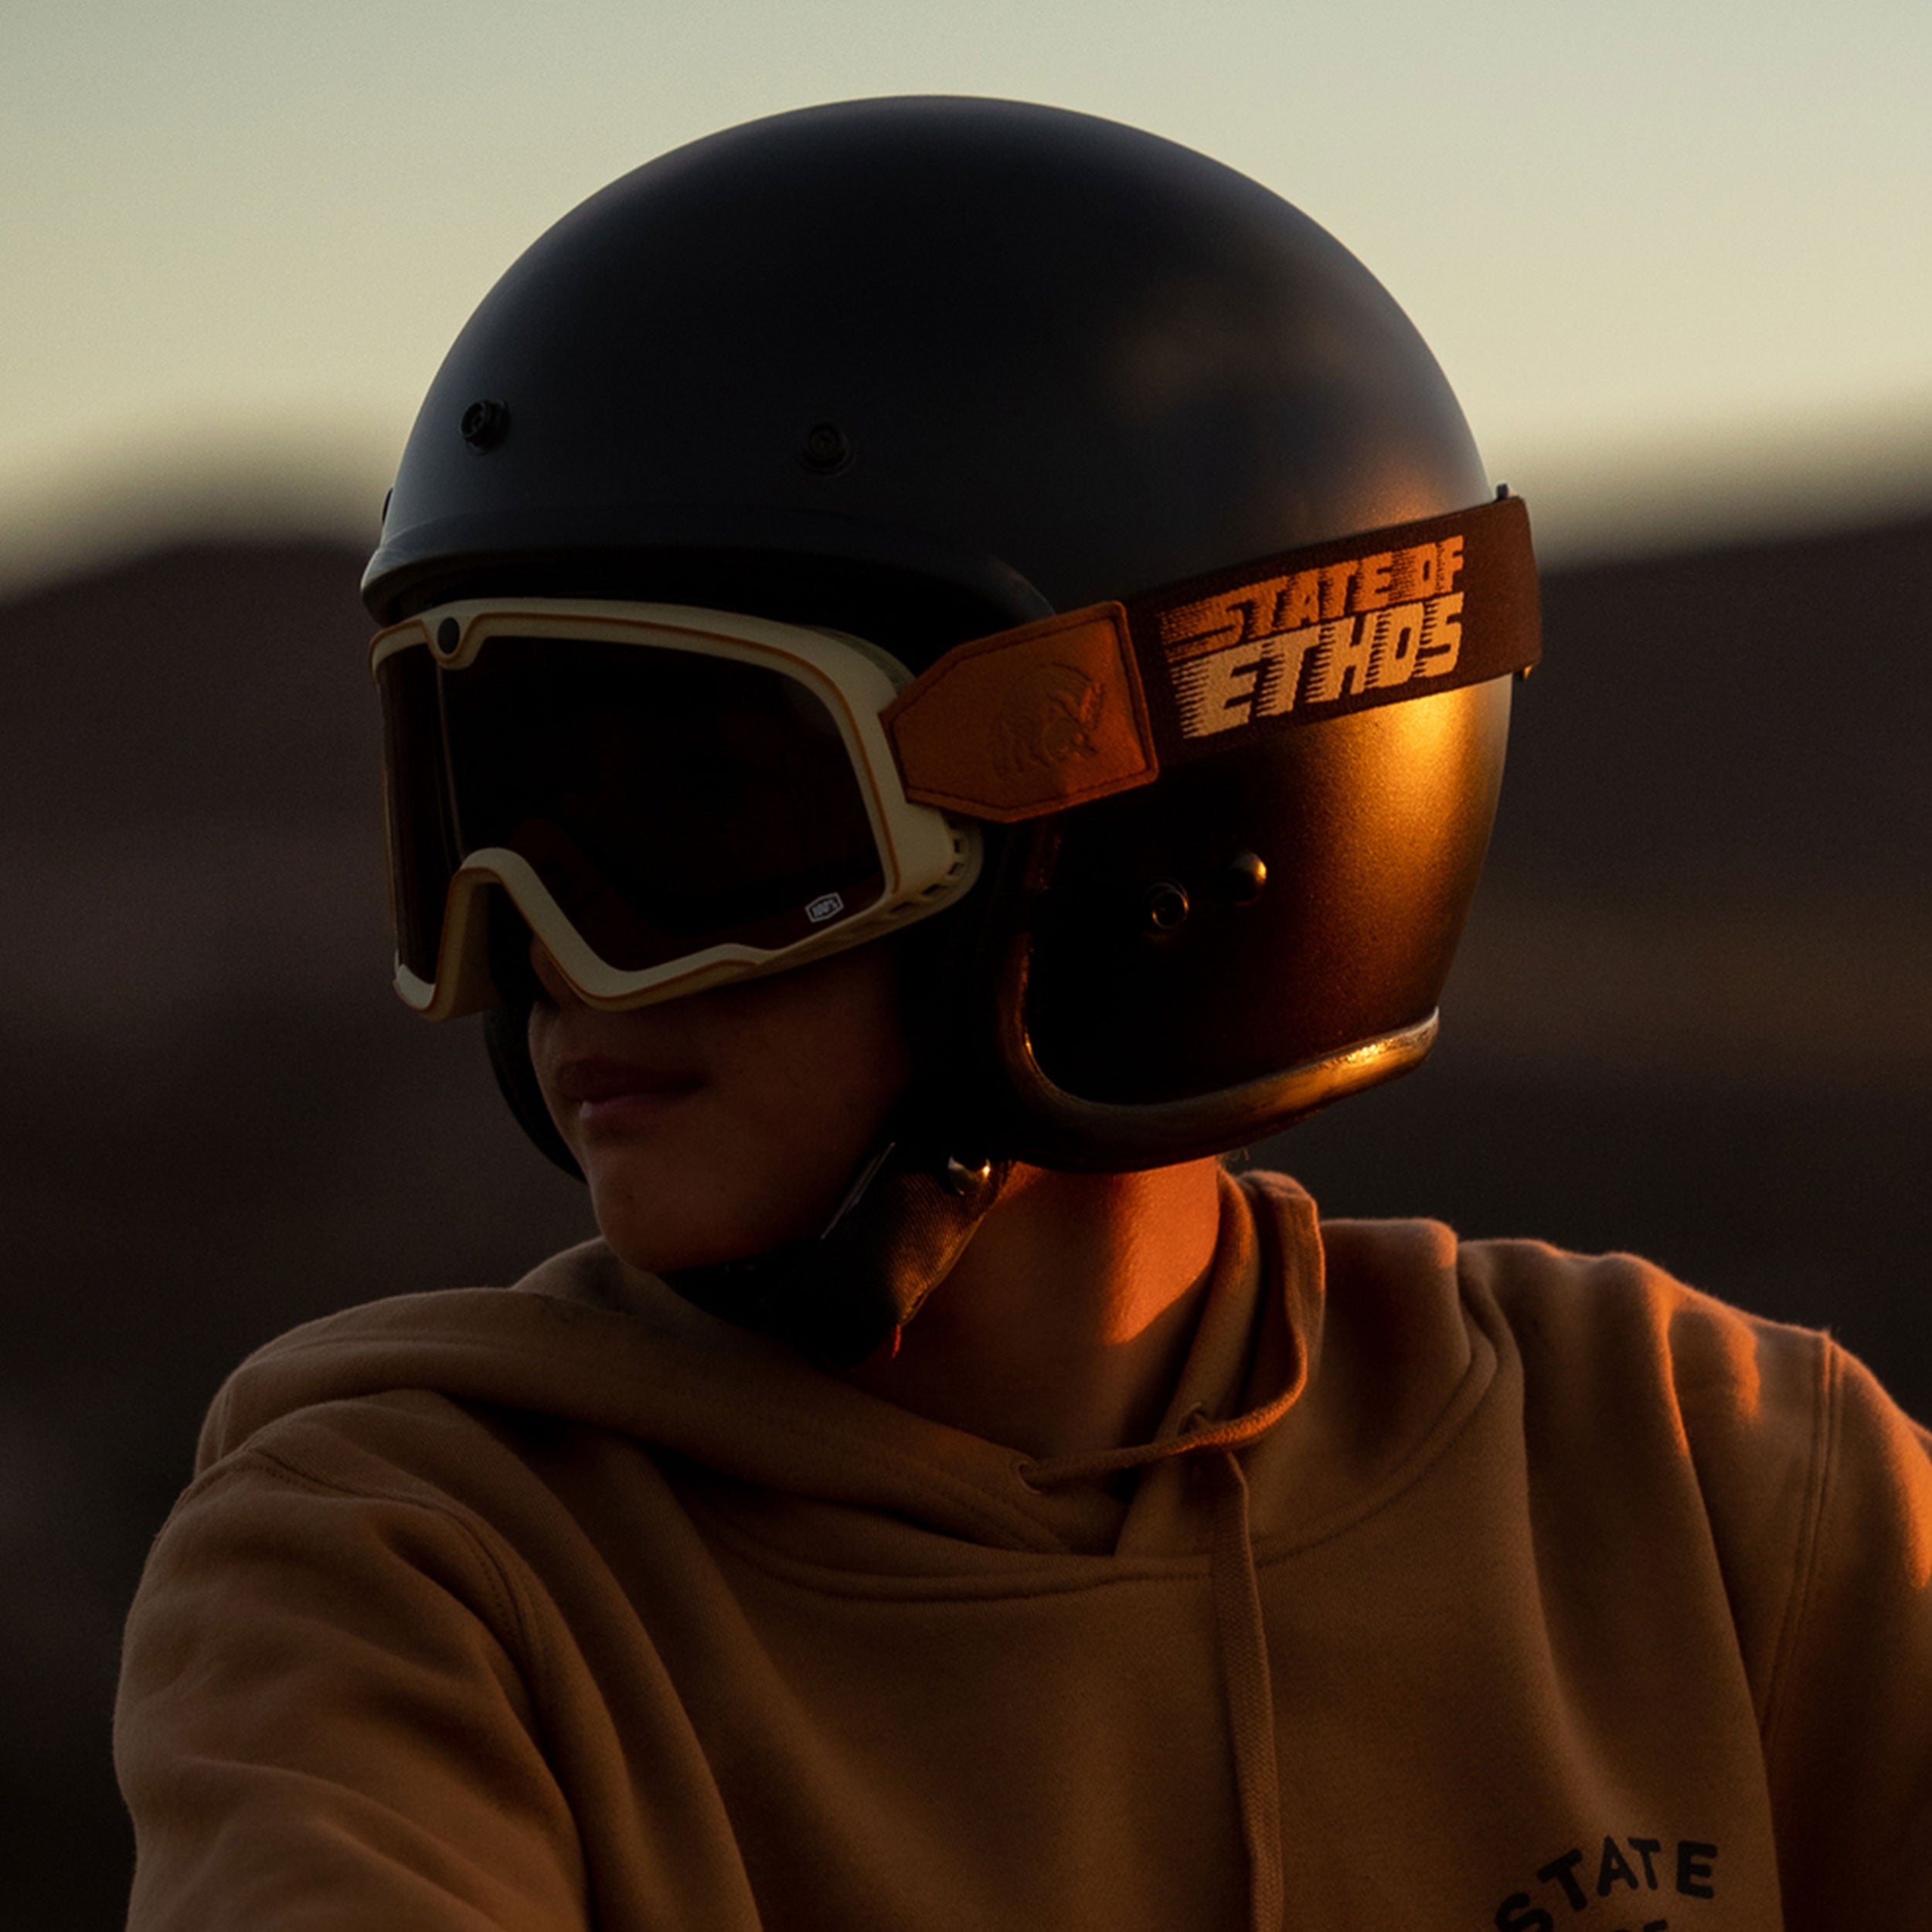 BARSTOW® Goggle State of Ethos